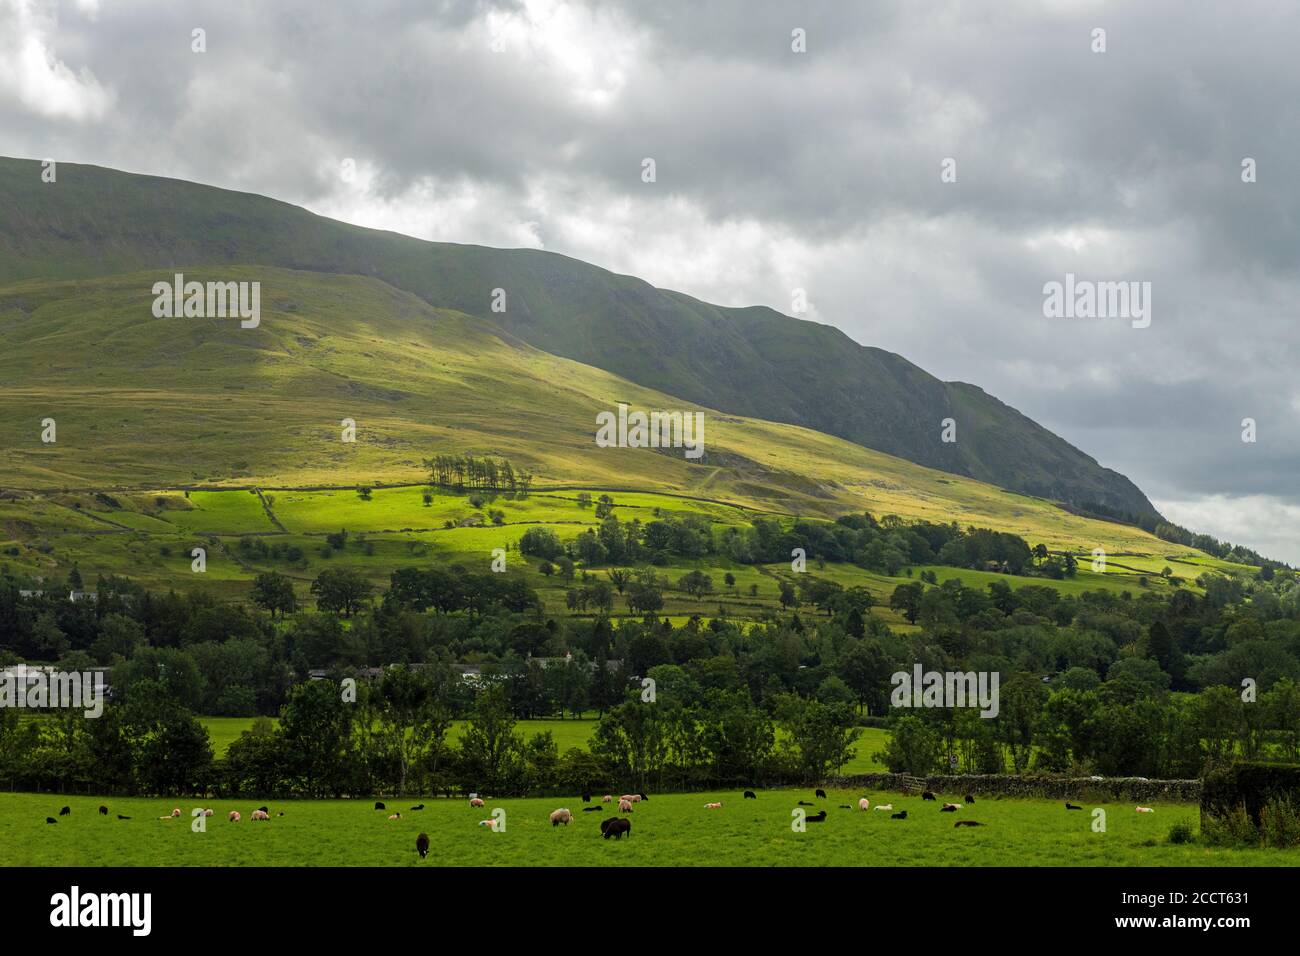 Clough Head overlooking the Lake District village of Threlkeld, pronounced locally as 'Threkell' near Keswick in the Lake District National Park. Stock Photo